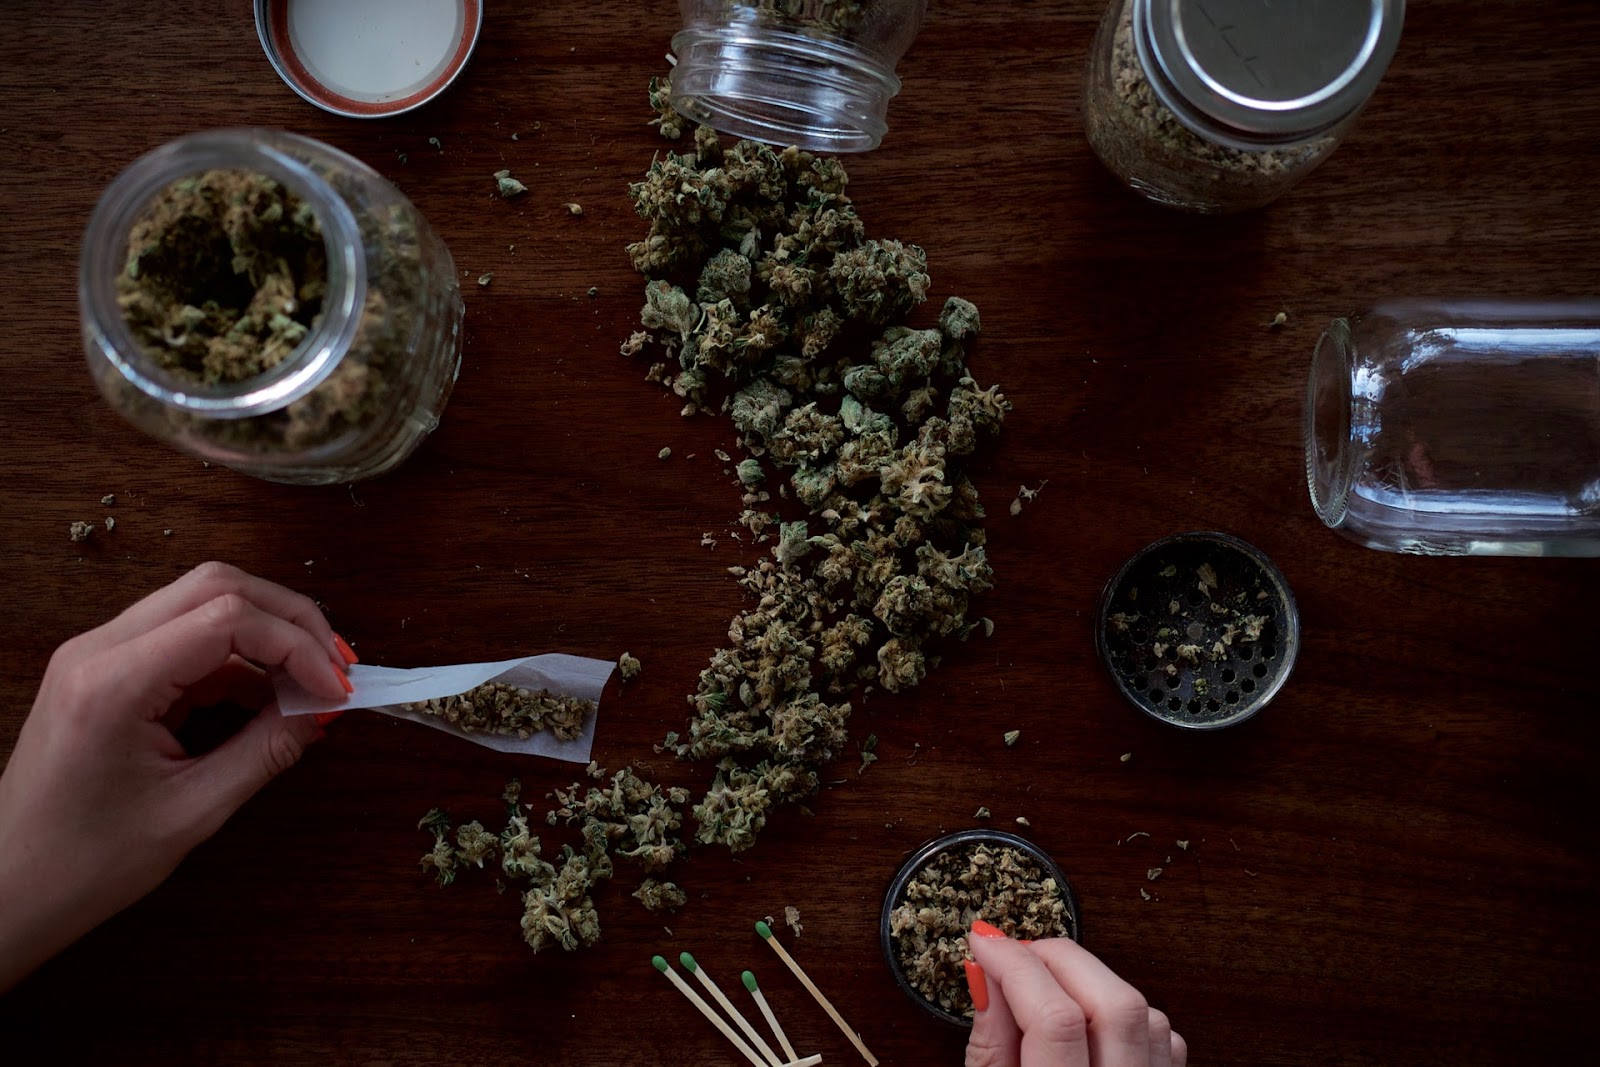 large jars of cannabis with grinder and full rolling paper